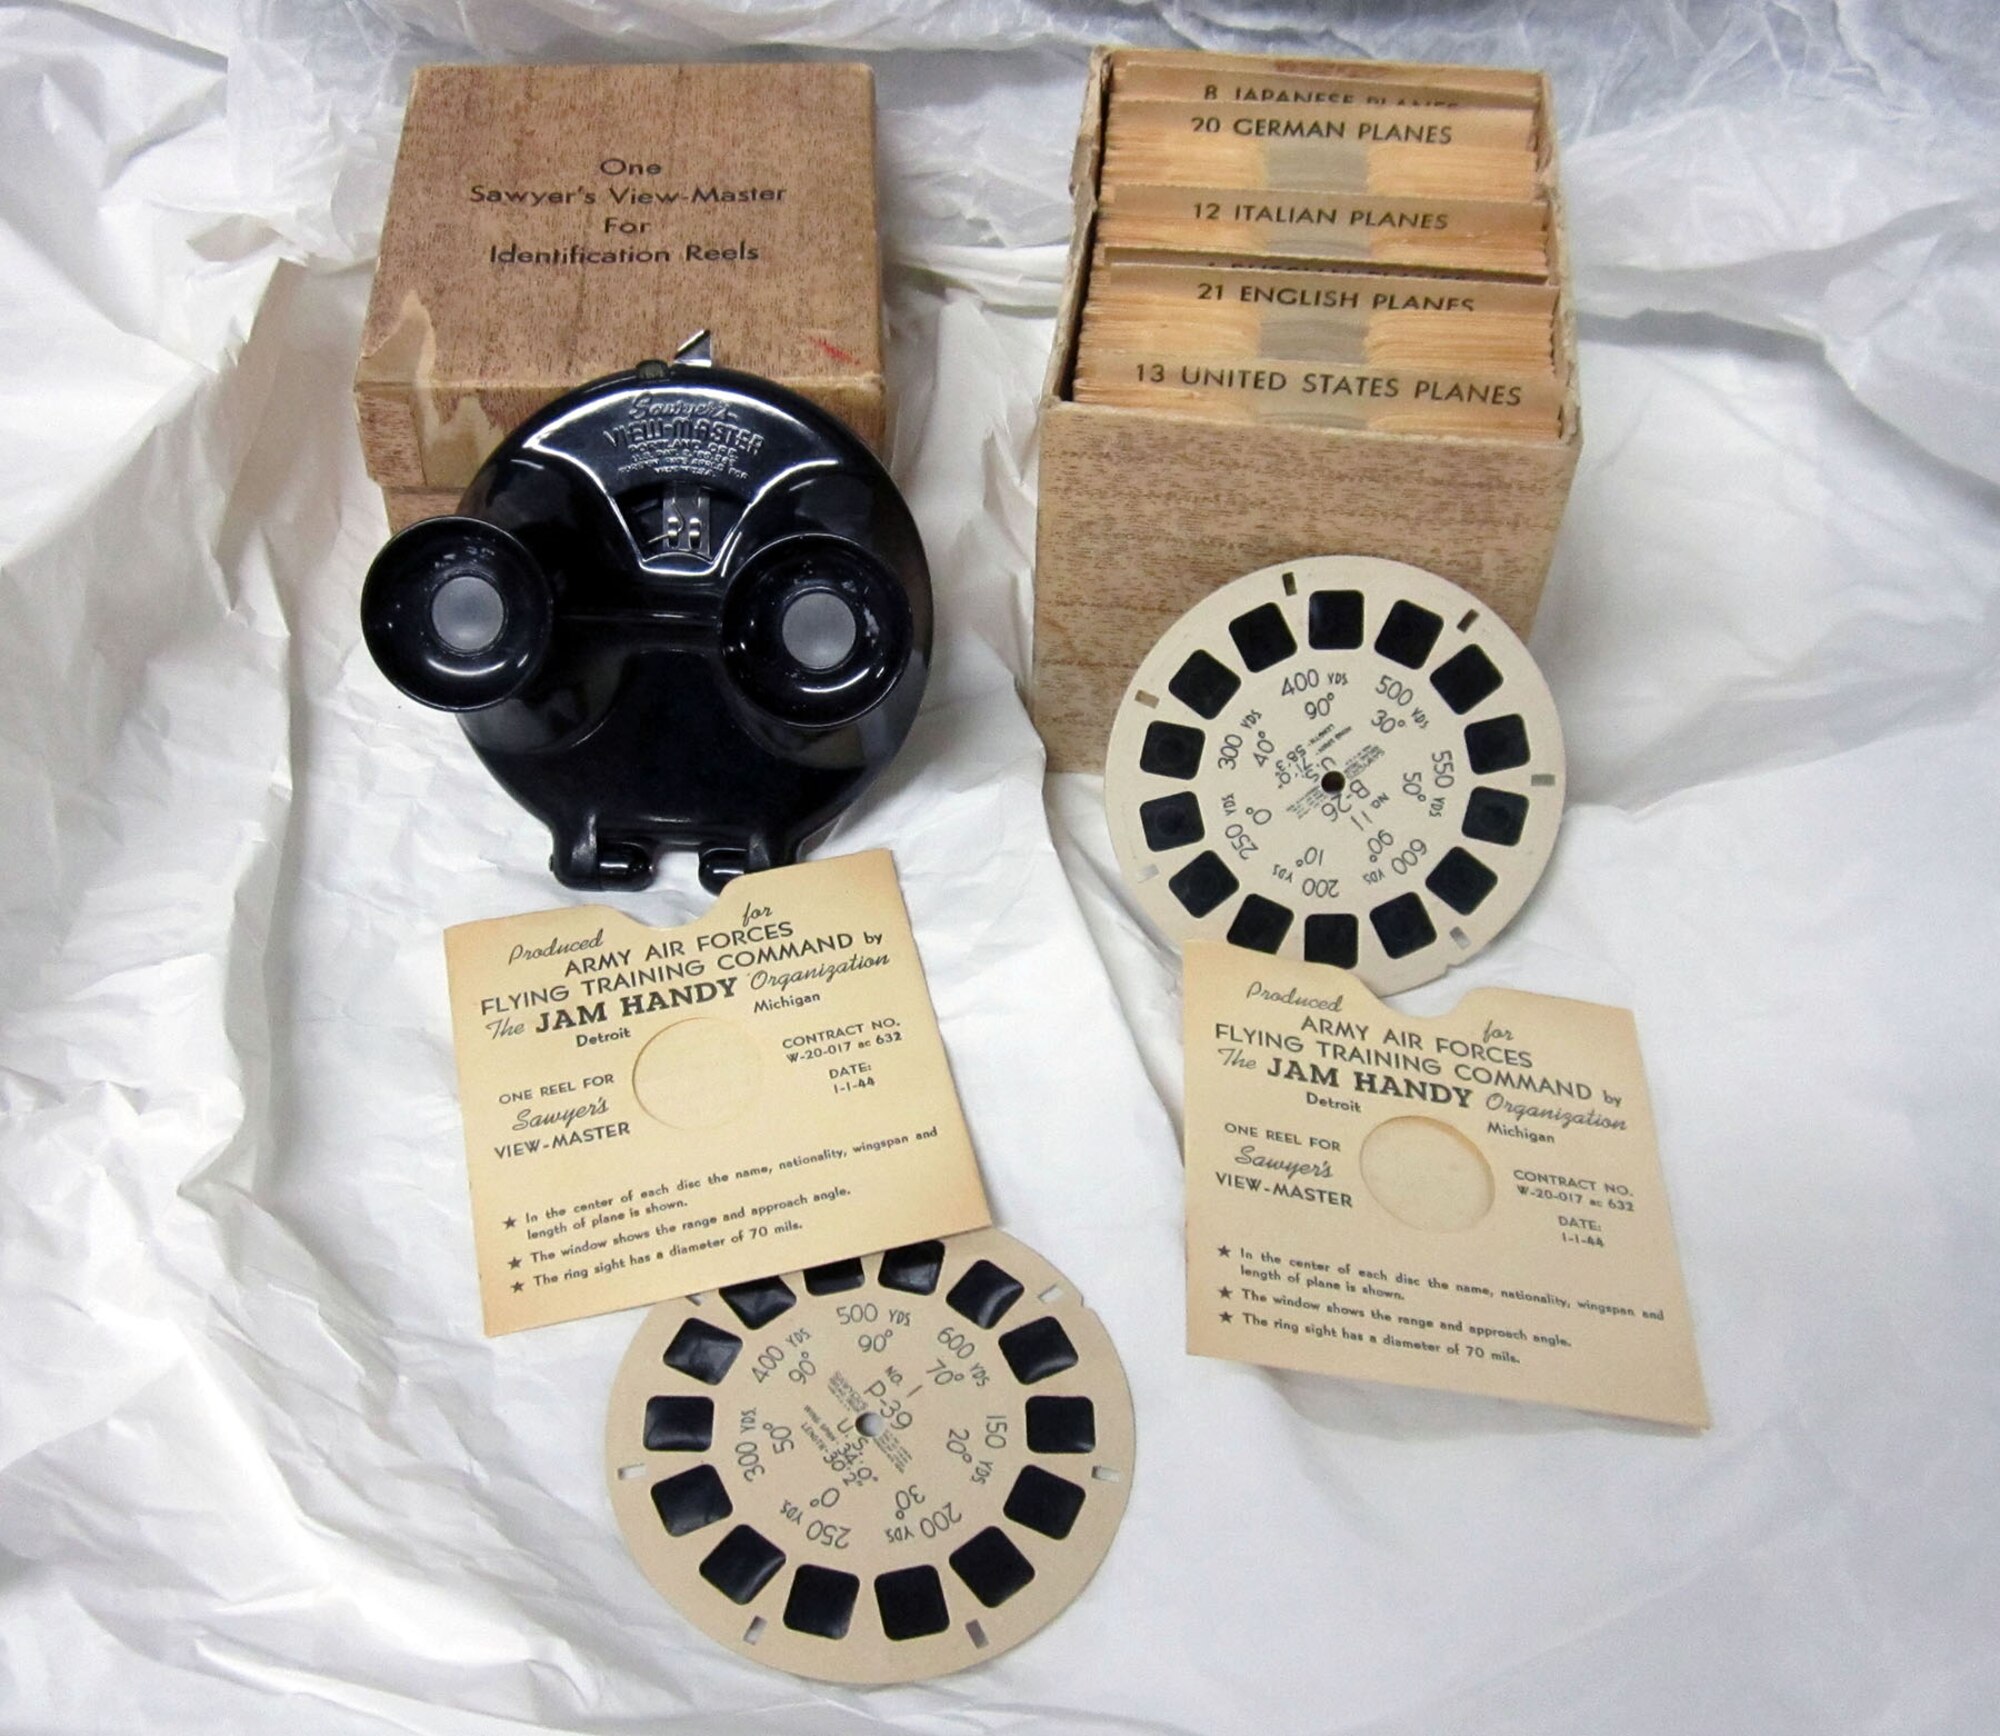 This Viewmaster belonged to Dale Malone Heverling Sr., the donor’s father-in-law. It features 78 reels of slides to teach the identification of U.S., English, Russian, Italian, German and Japanese aircraft during World War II. (U.S. Air Force photo)